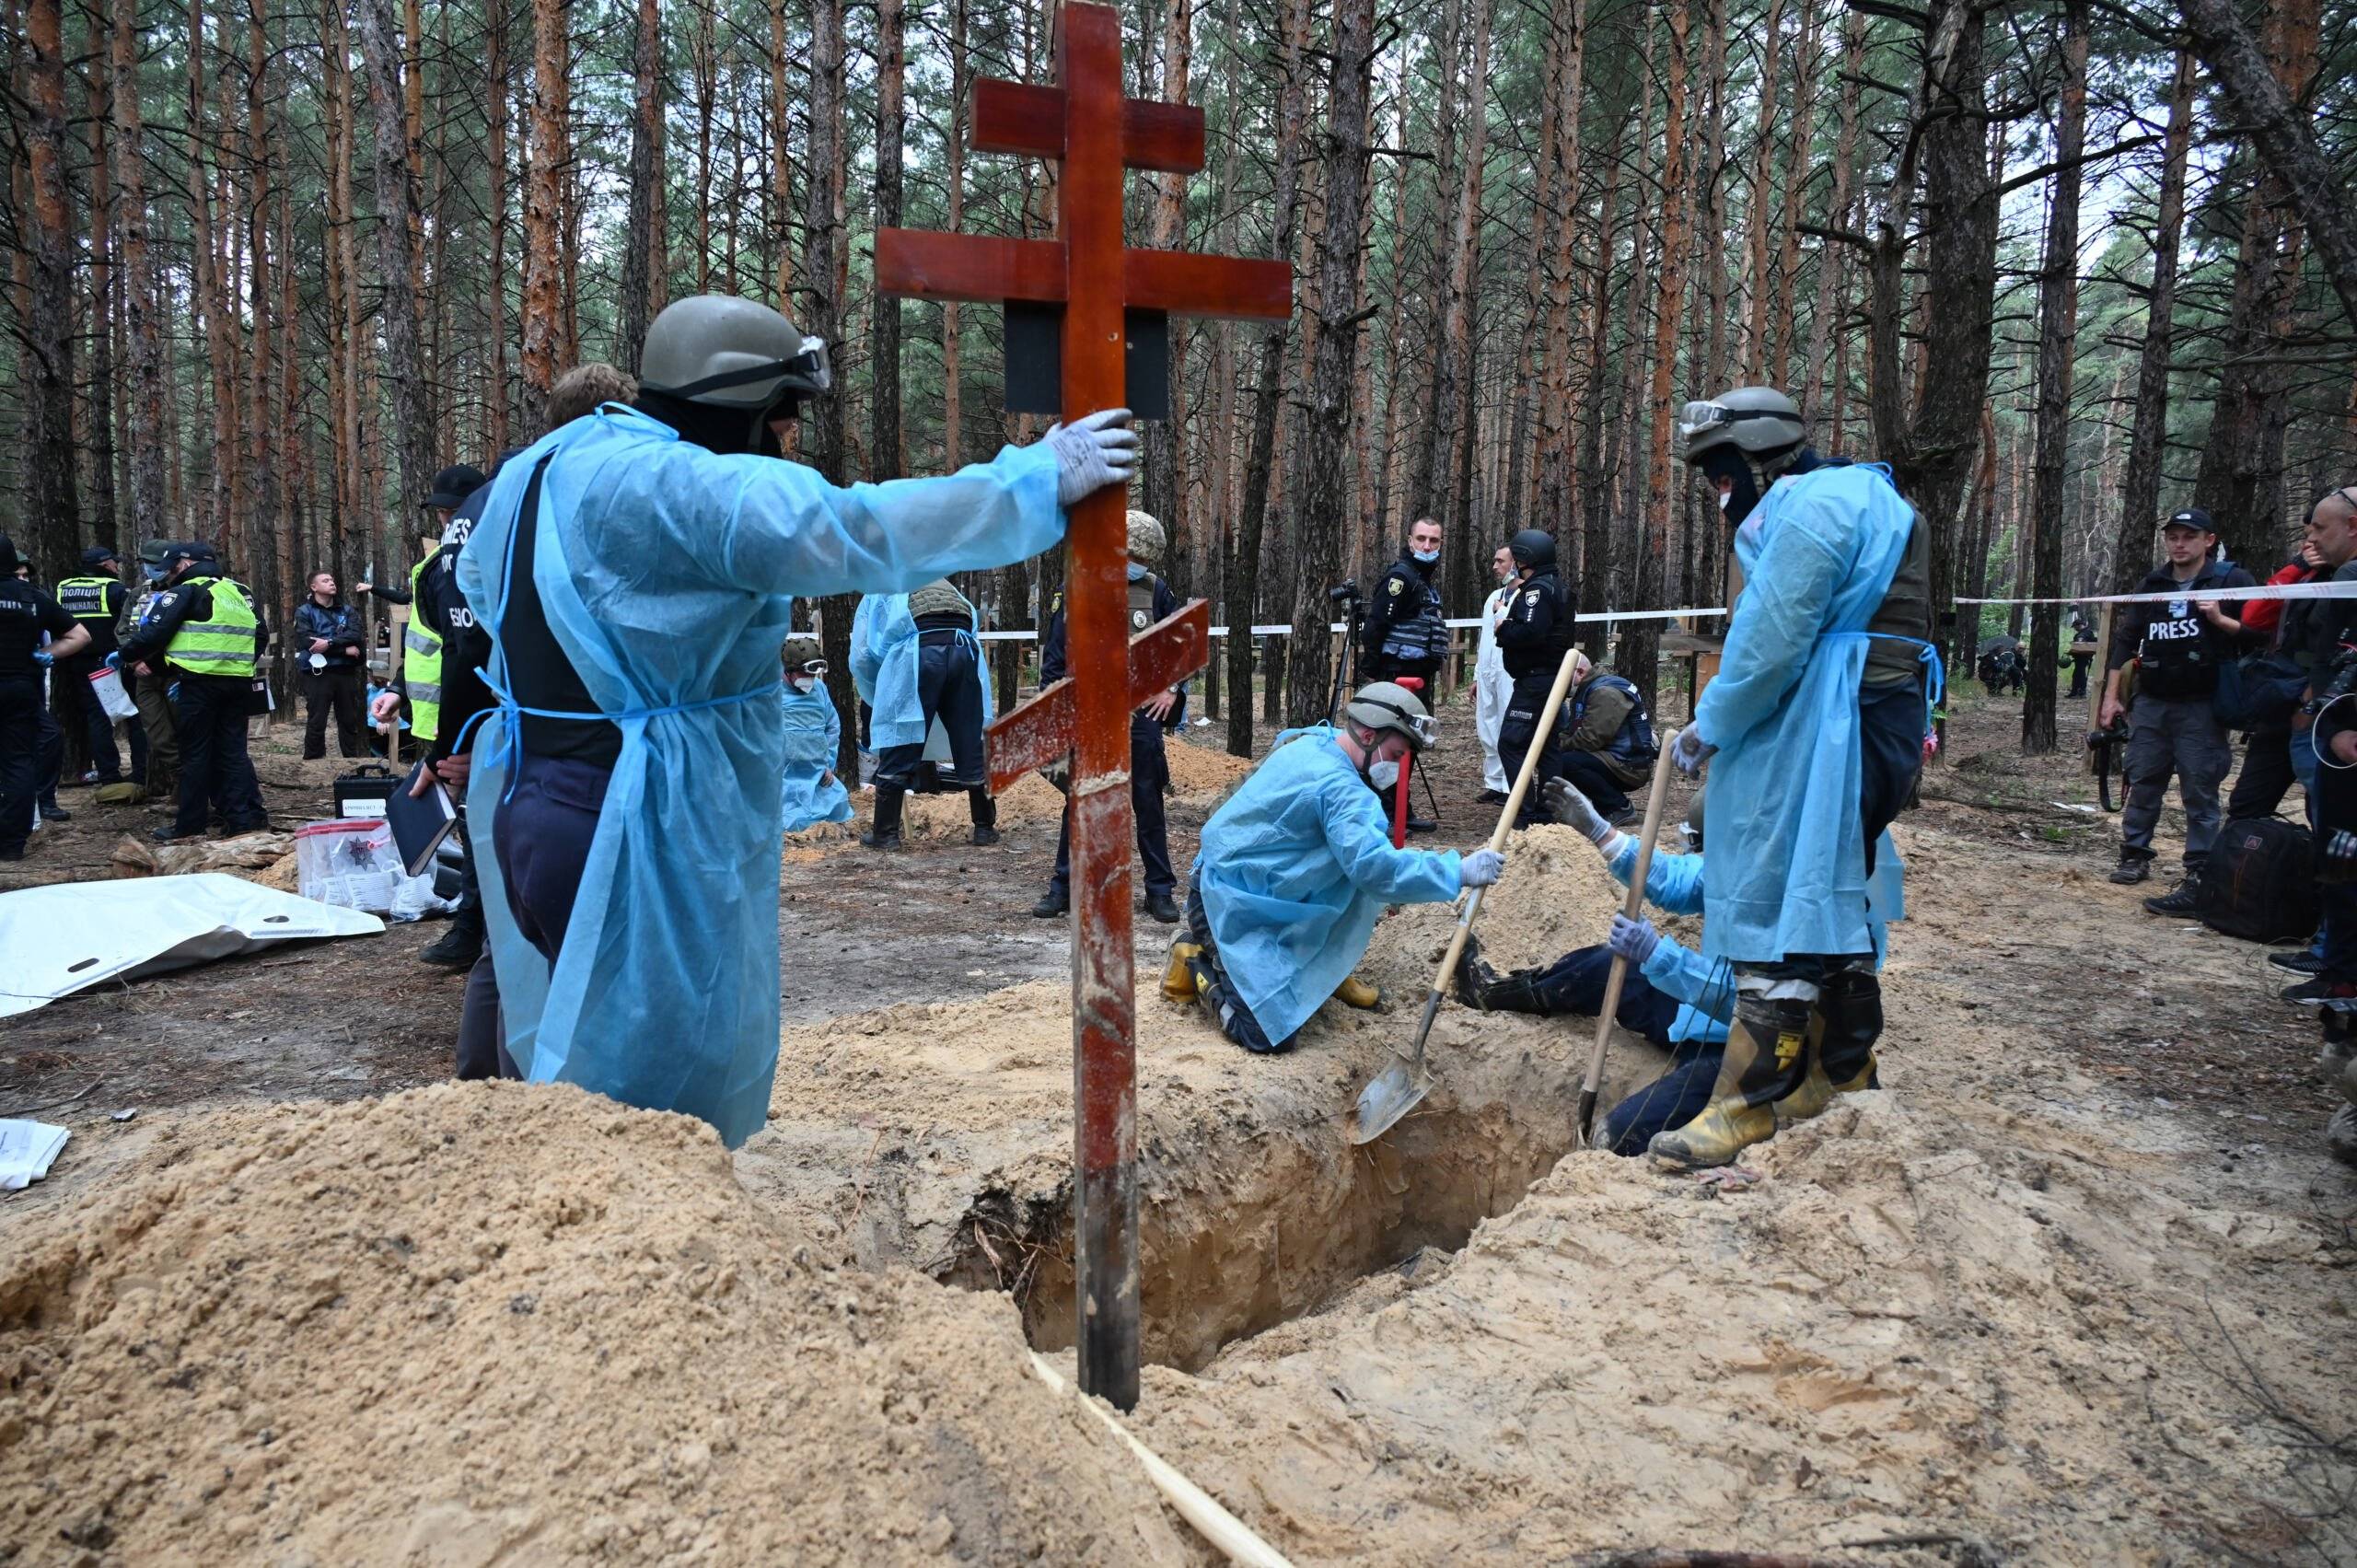 Forensic technicians dig a grave in a forest on the outskirts of Izyum, eastern Ukraine on September 16, 2022. - Ukraine said on September 16, 2022 it had counted 450 graves at just one burial site near Izyum after recapturing the eastern city from the Russians. (Photo by SERGEY BOBOK / AFP)